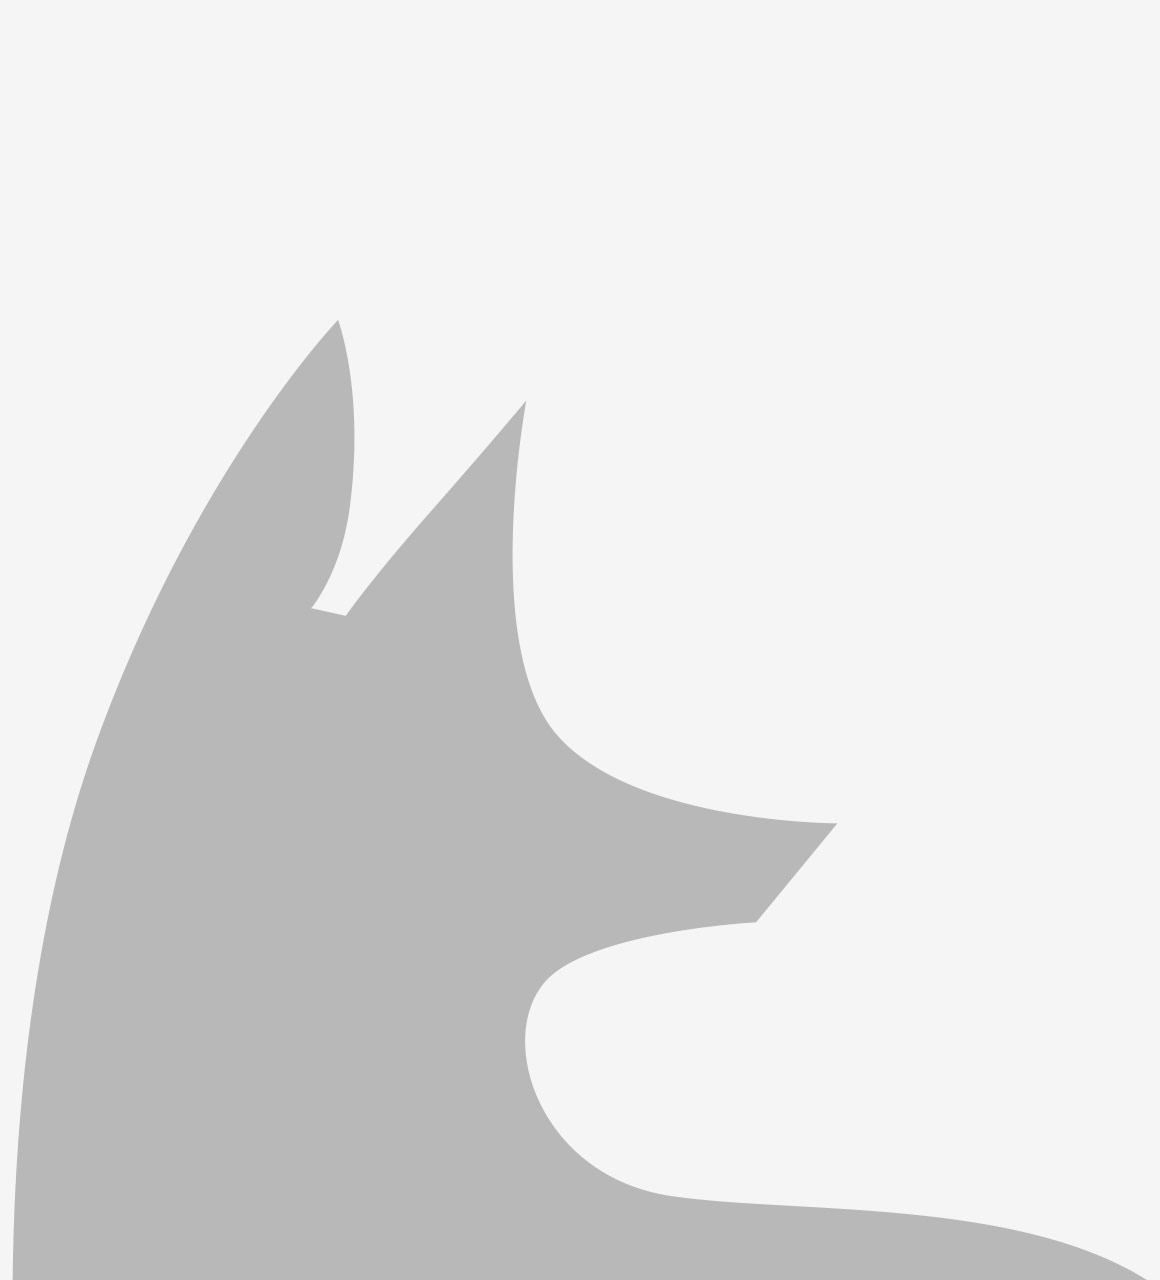 Gray fox silhouette on gray background